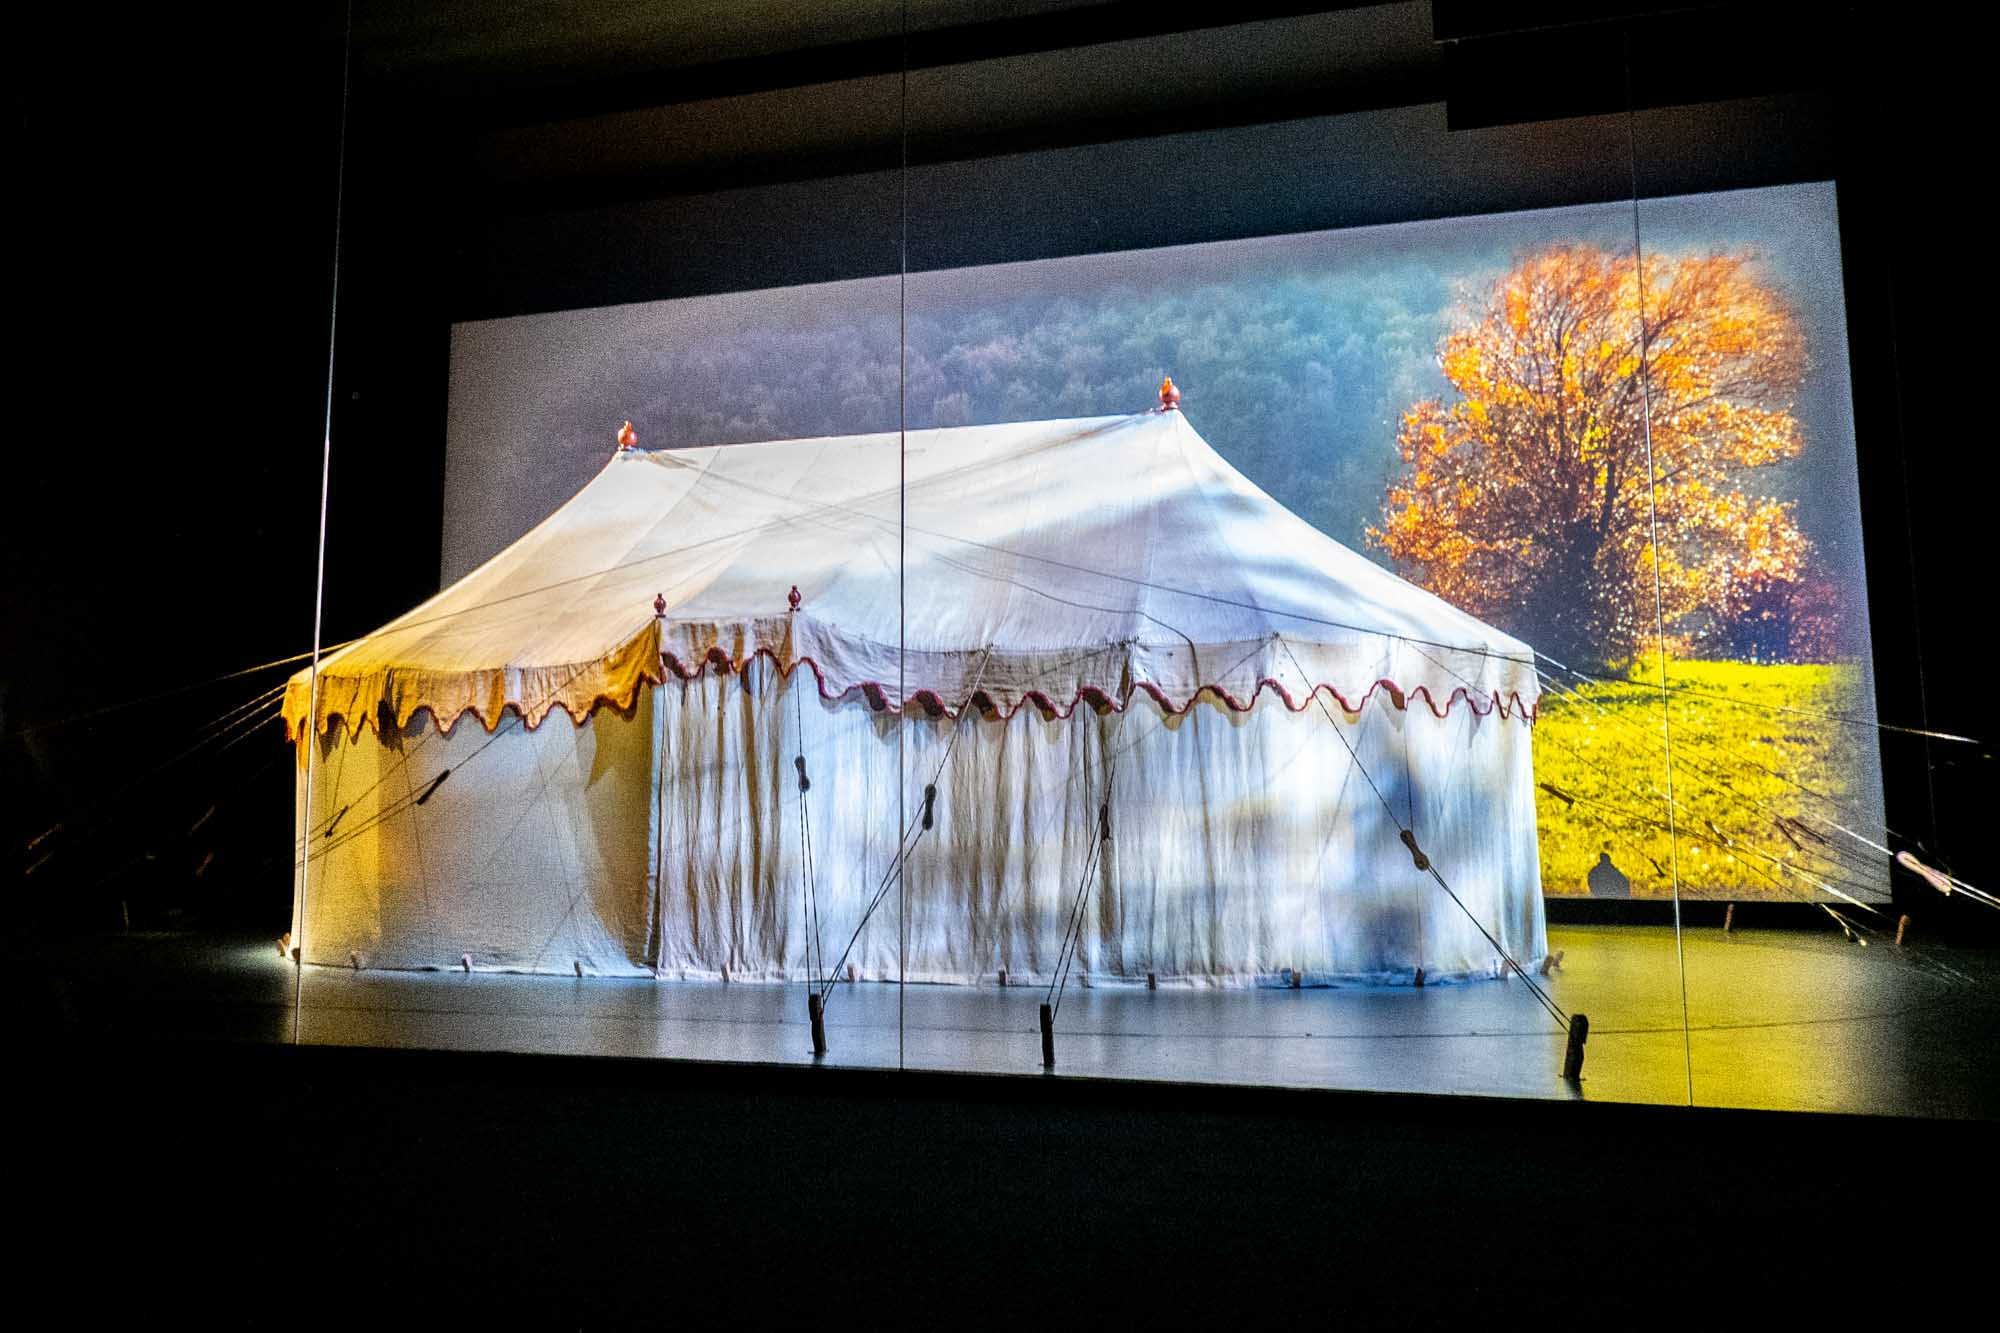 Large white fabric tent on a stage